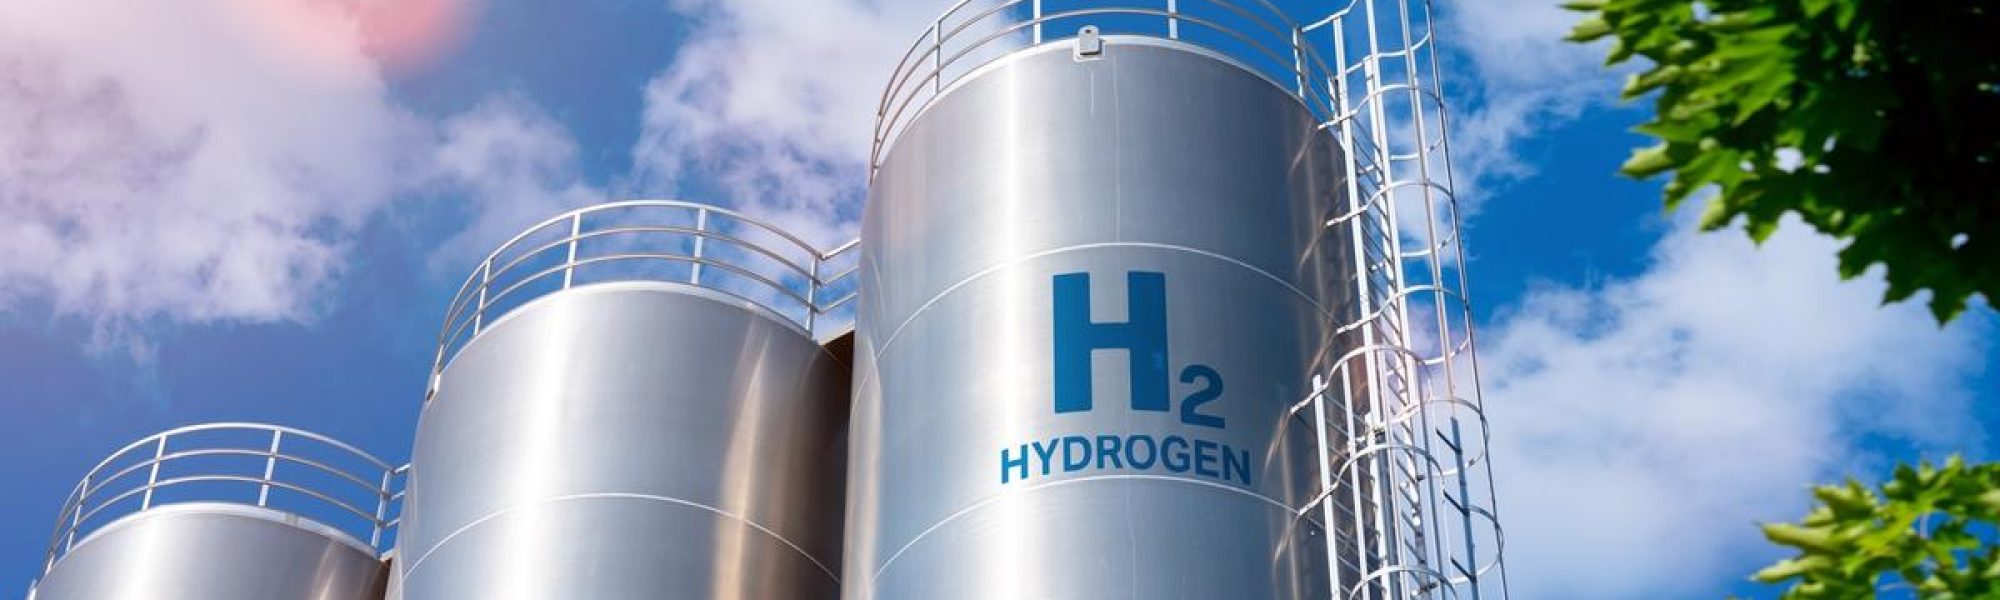 Hydrogen Hubs are the Face of America’s Hydrogen Rollout